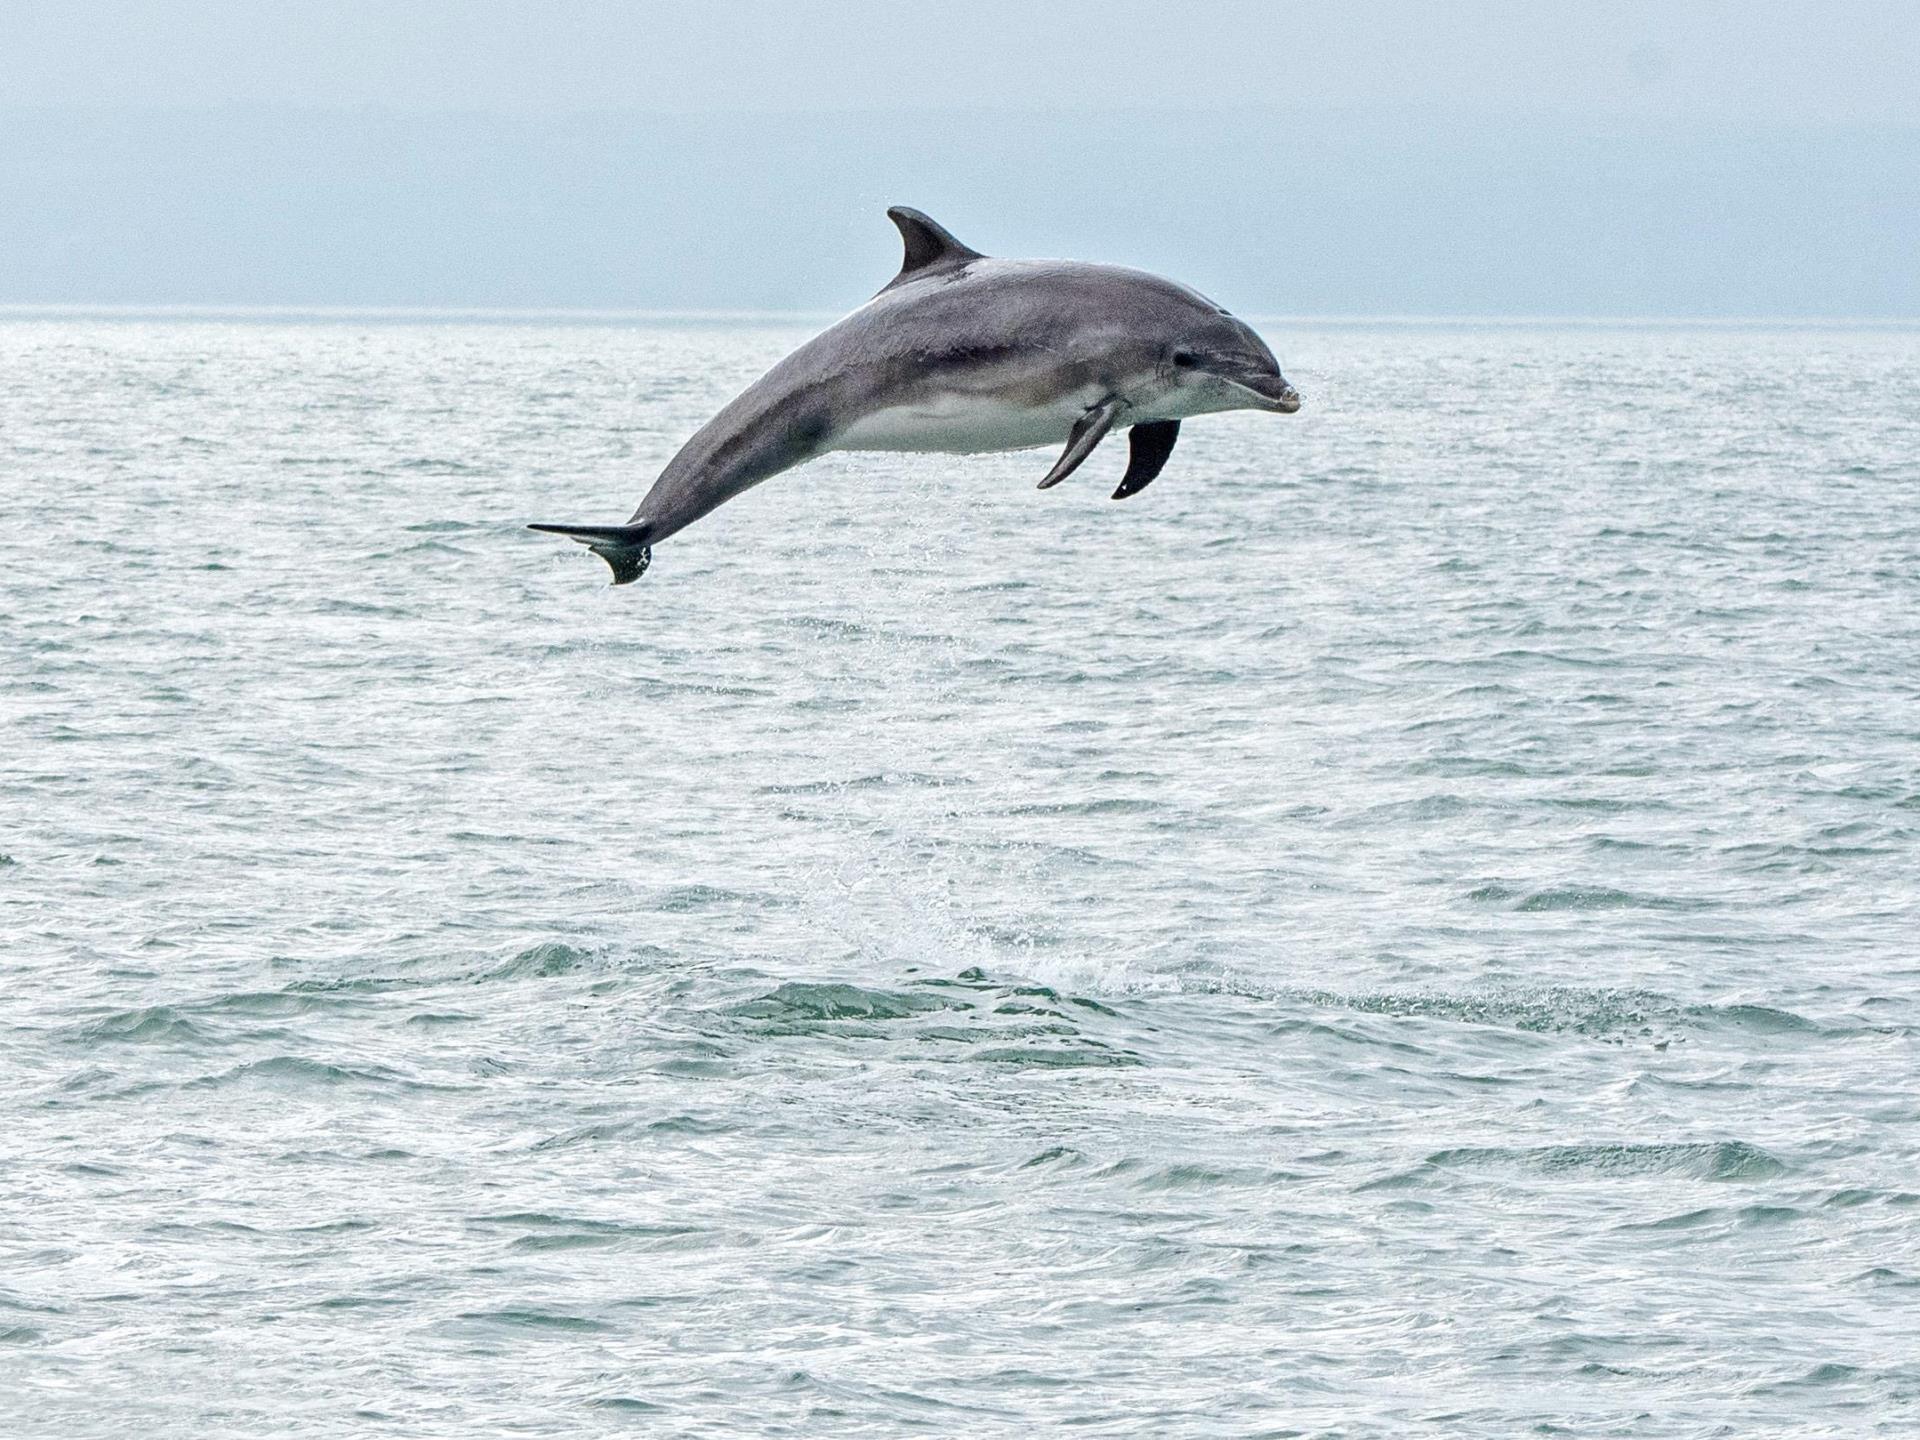 A young bottlenose dolphin breaching